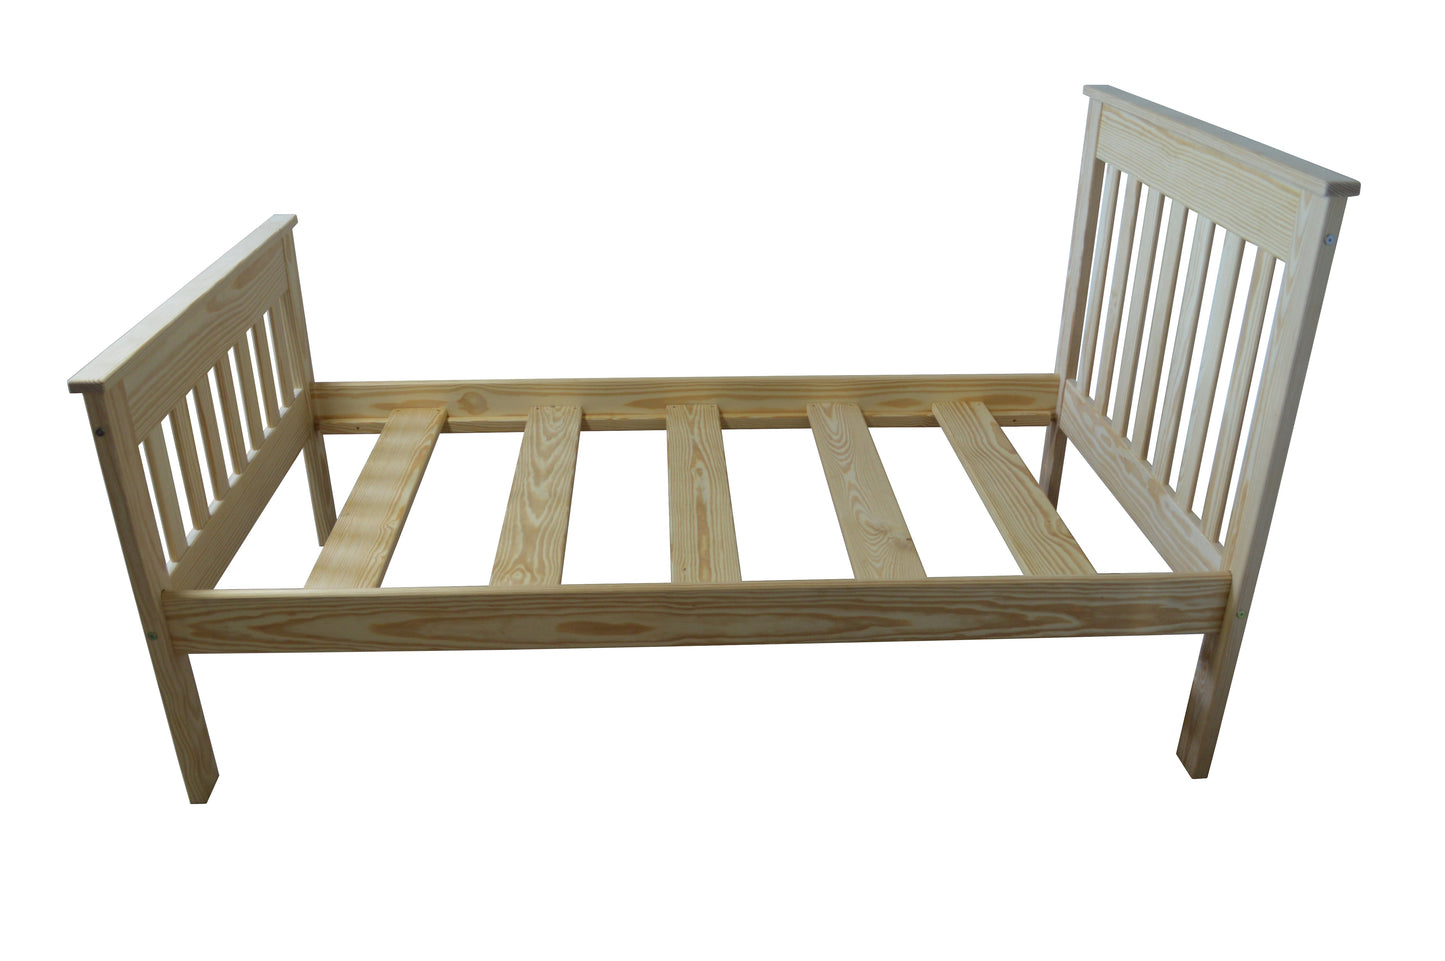 A&L Furniture Versaloft Twin XL Harmony Bed Frame - LEAD TIME TO SHIP 10 BUSINESS DAY